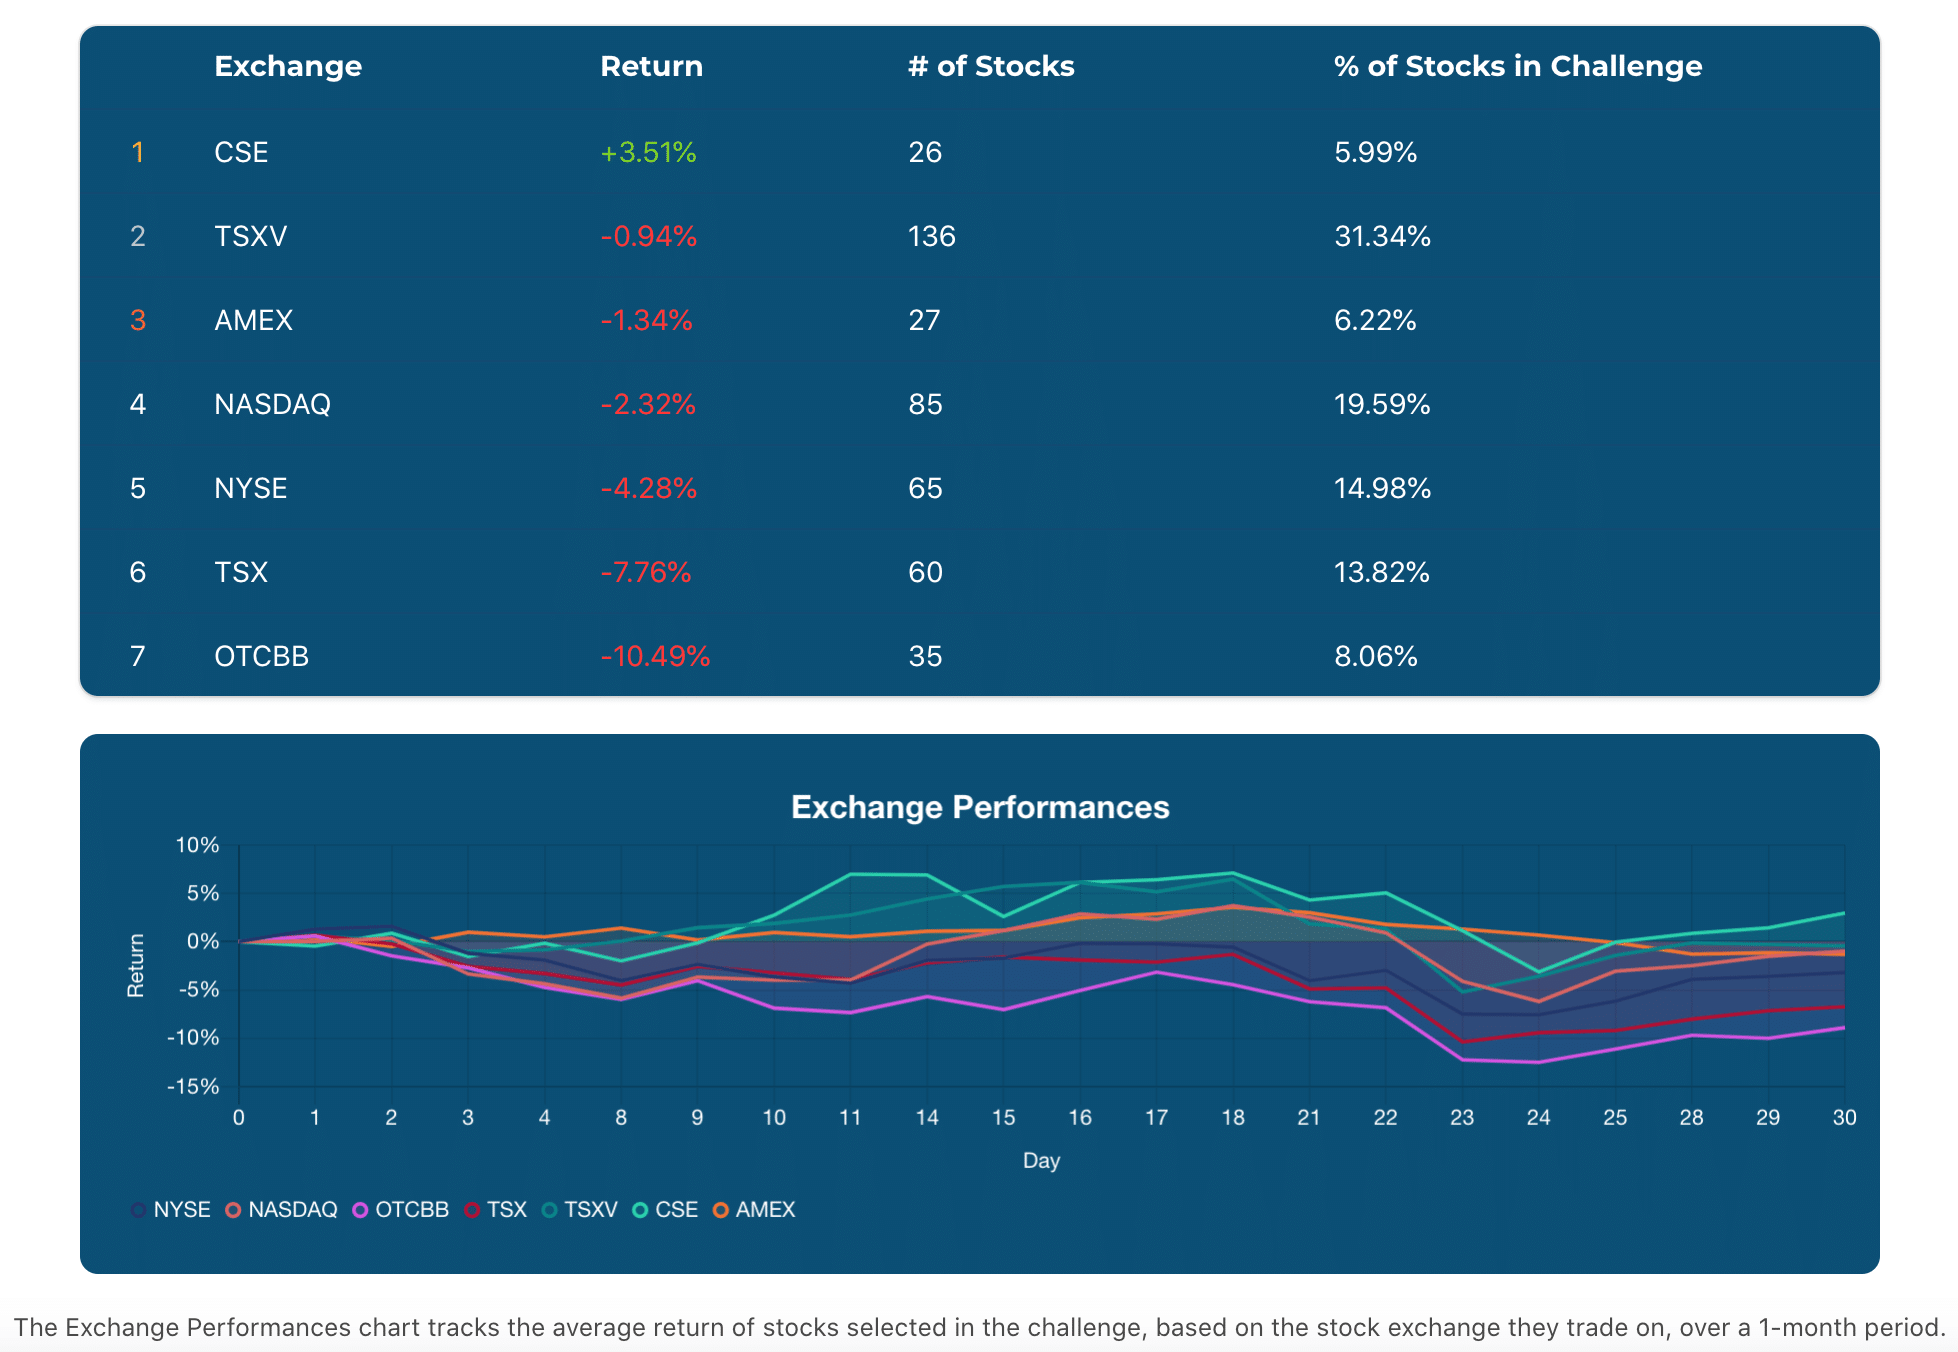 Exchange Performances as of September 30, 2020